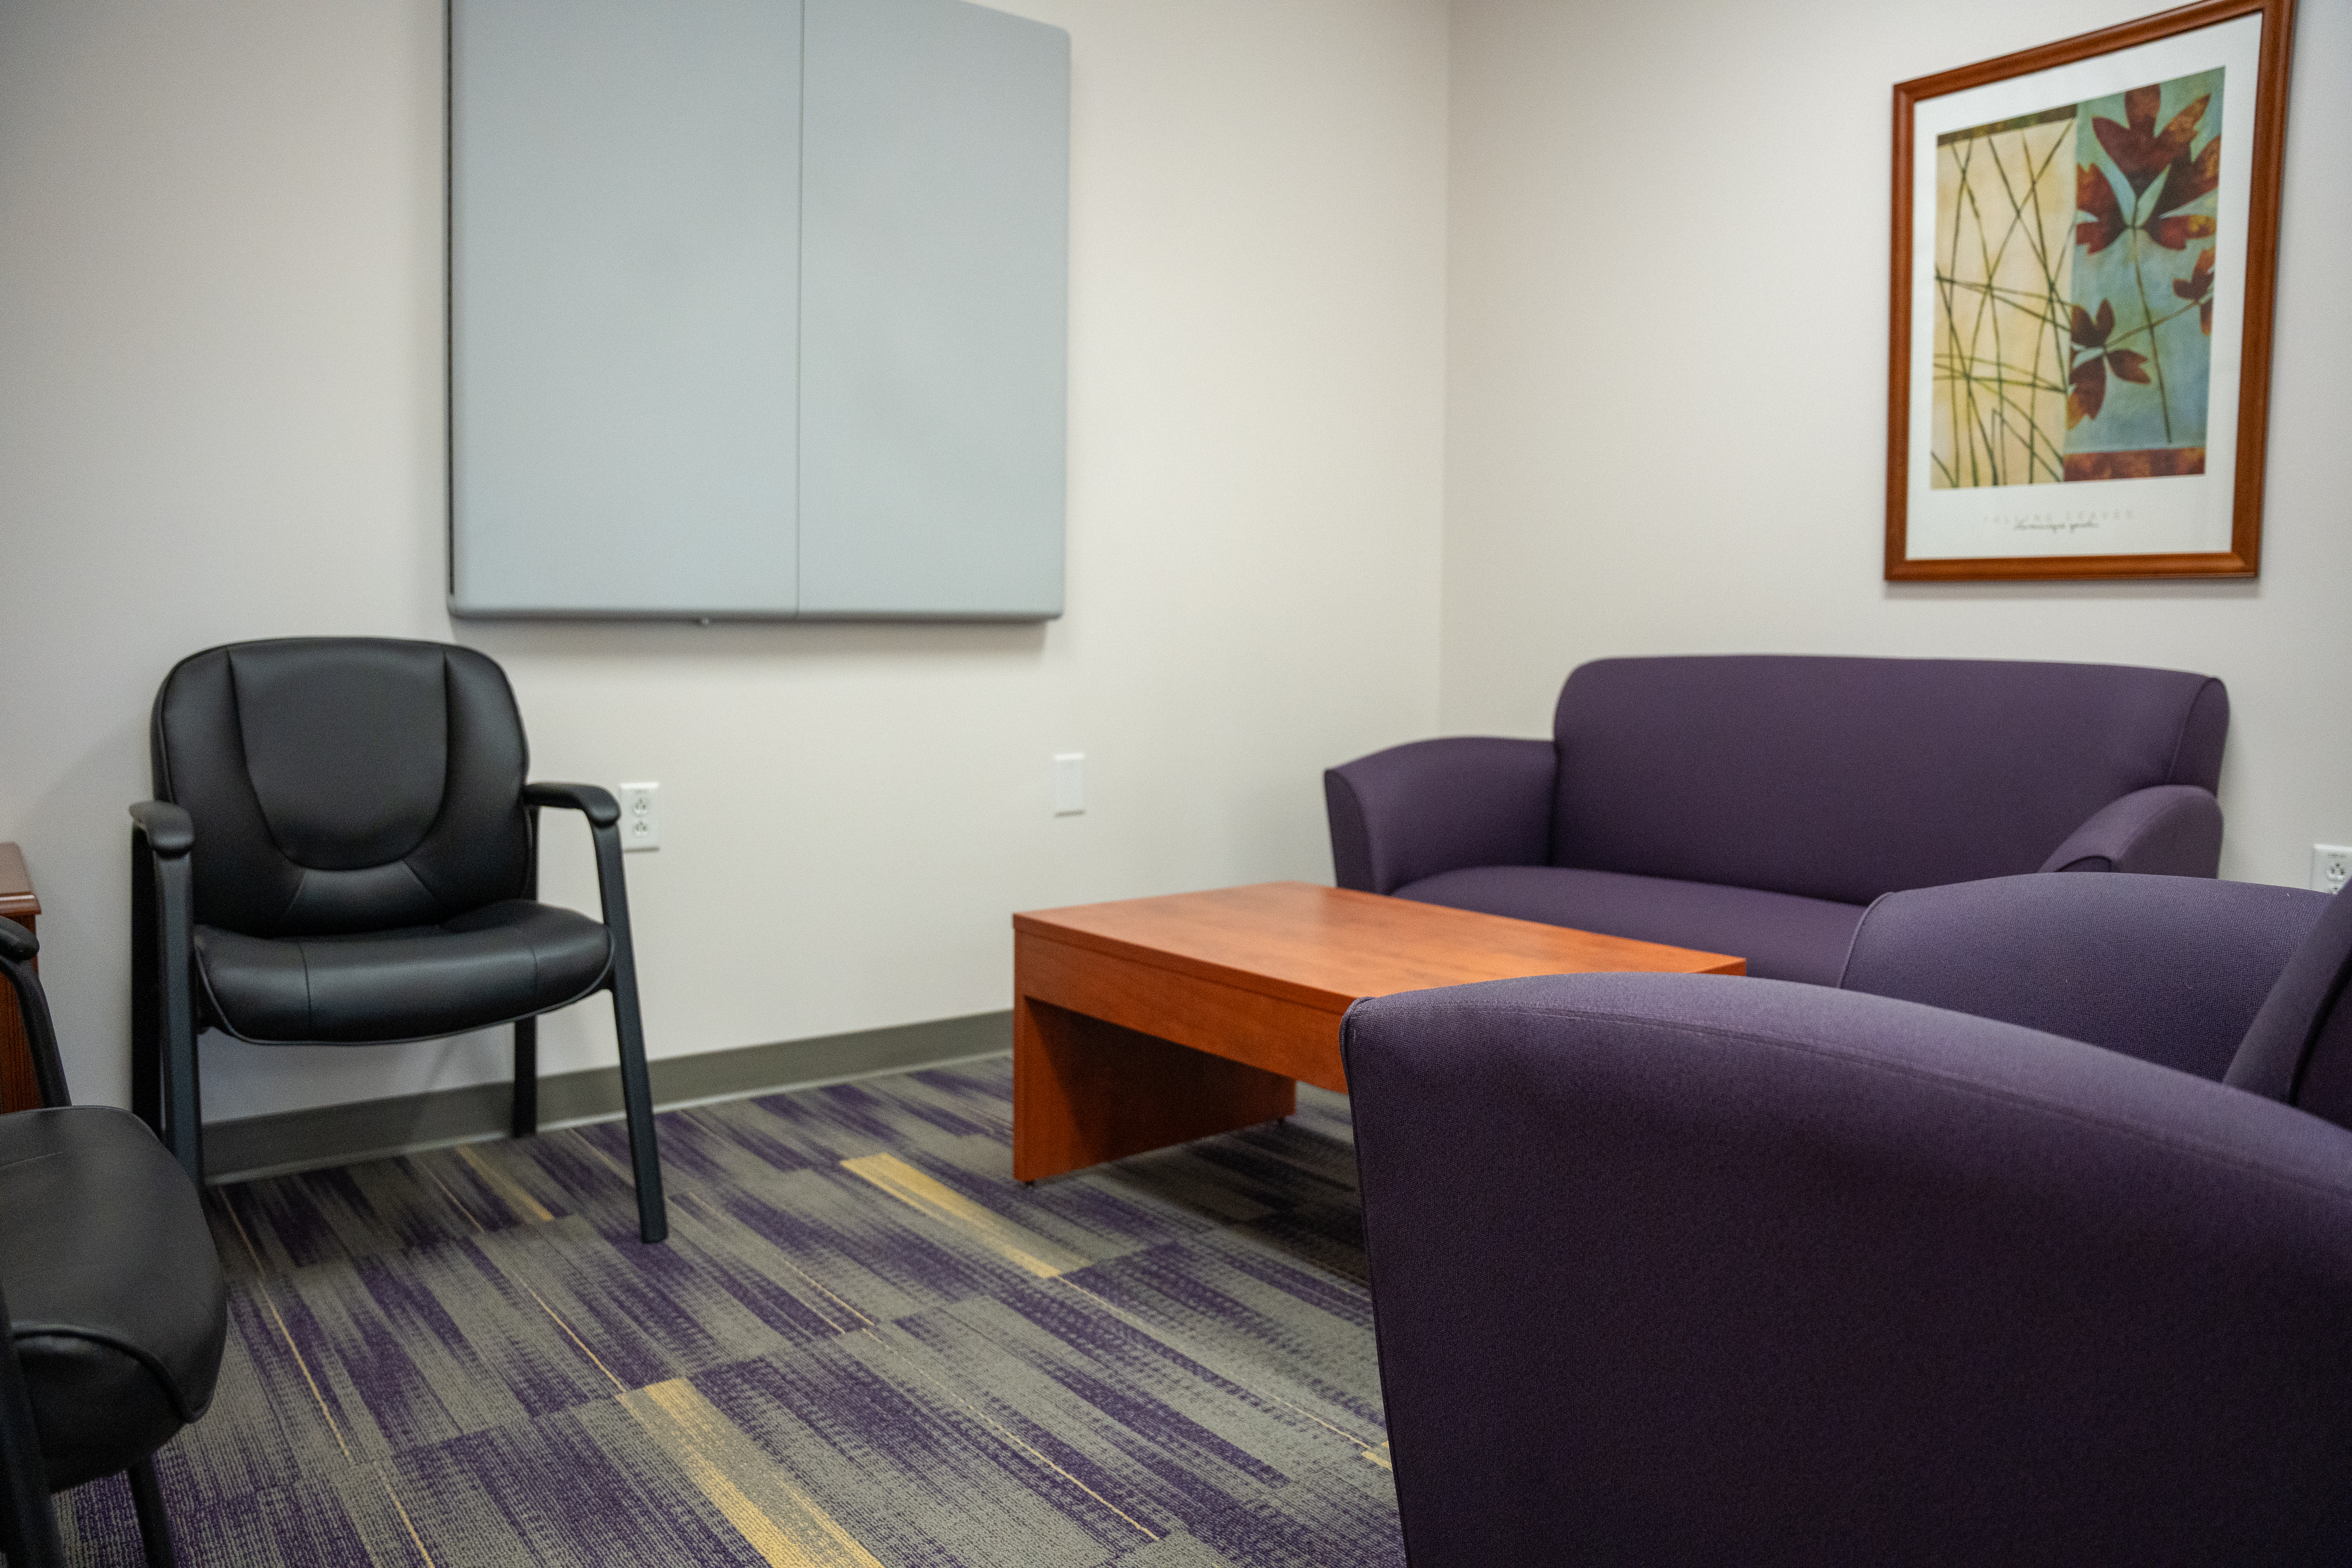 lactation room equips with couches and chairs